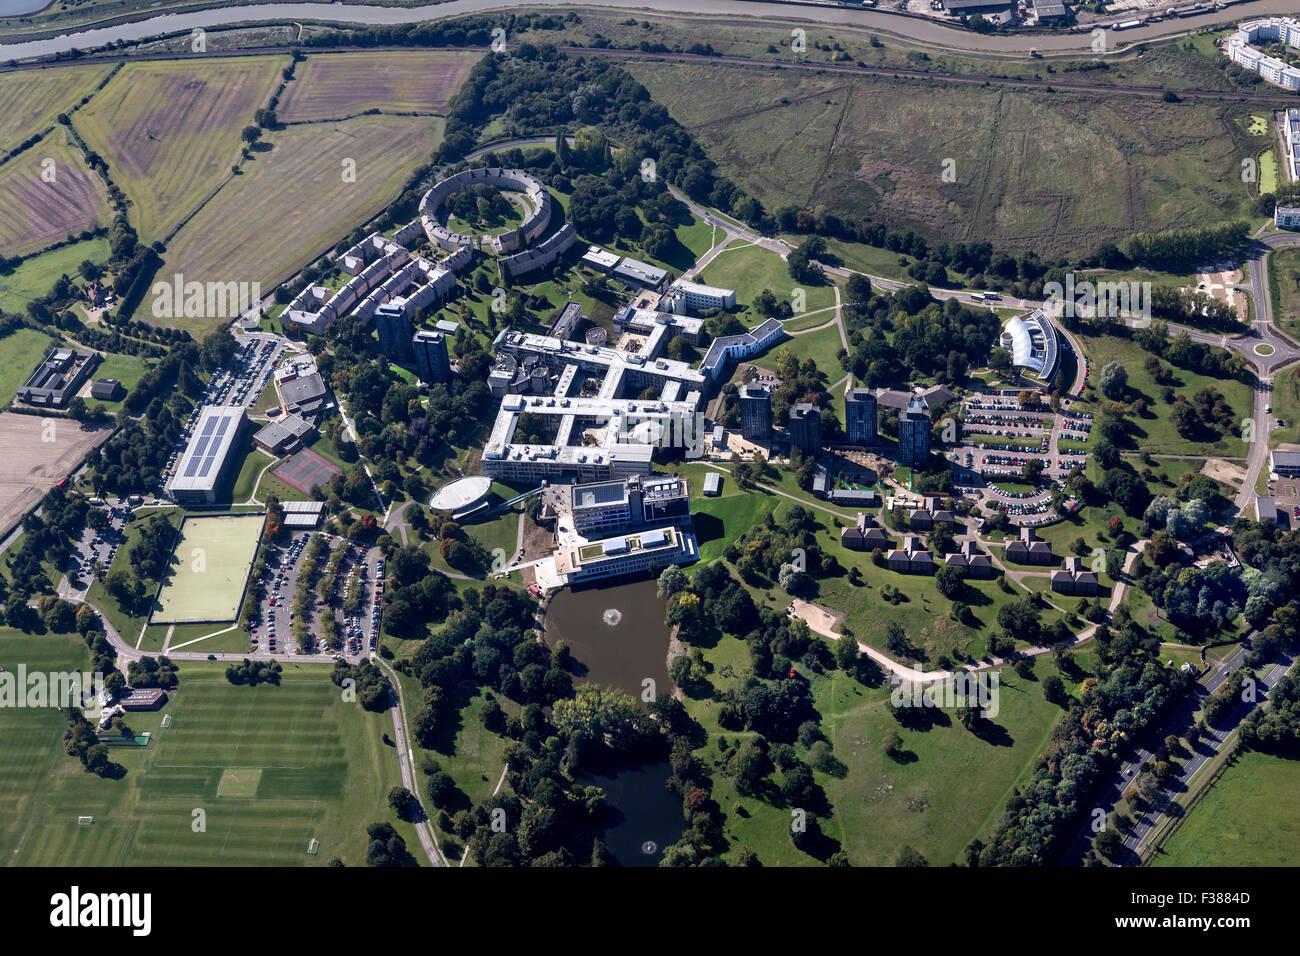 AERIAL VIEWS OF THE UNIVERSITY OF ESSEX, WIVENHOE SHOWING THE CAMPUS AND LIVING ACCOMMODATION Stock Photo